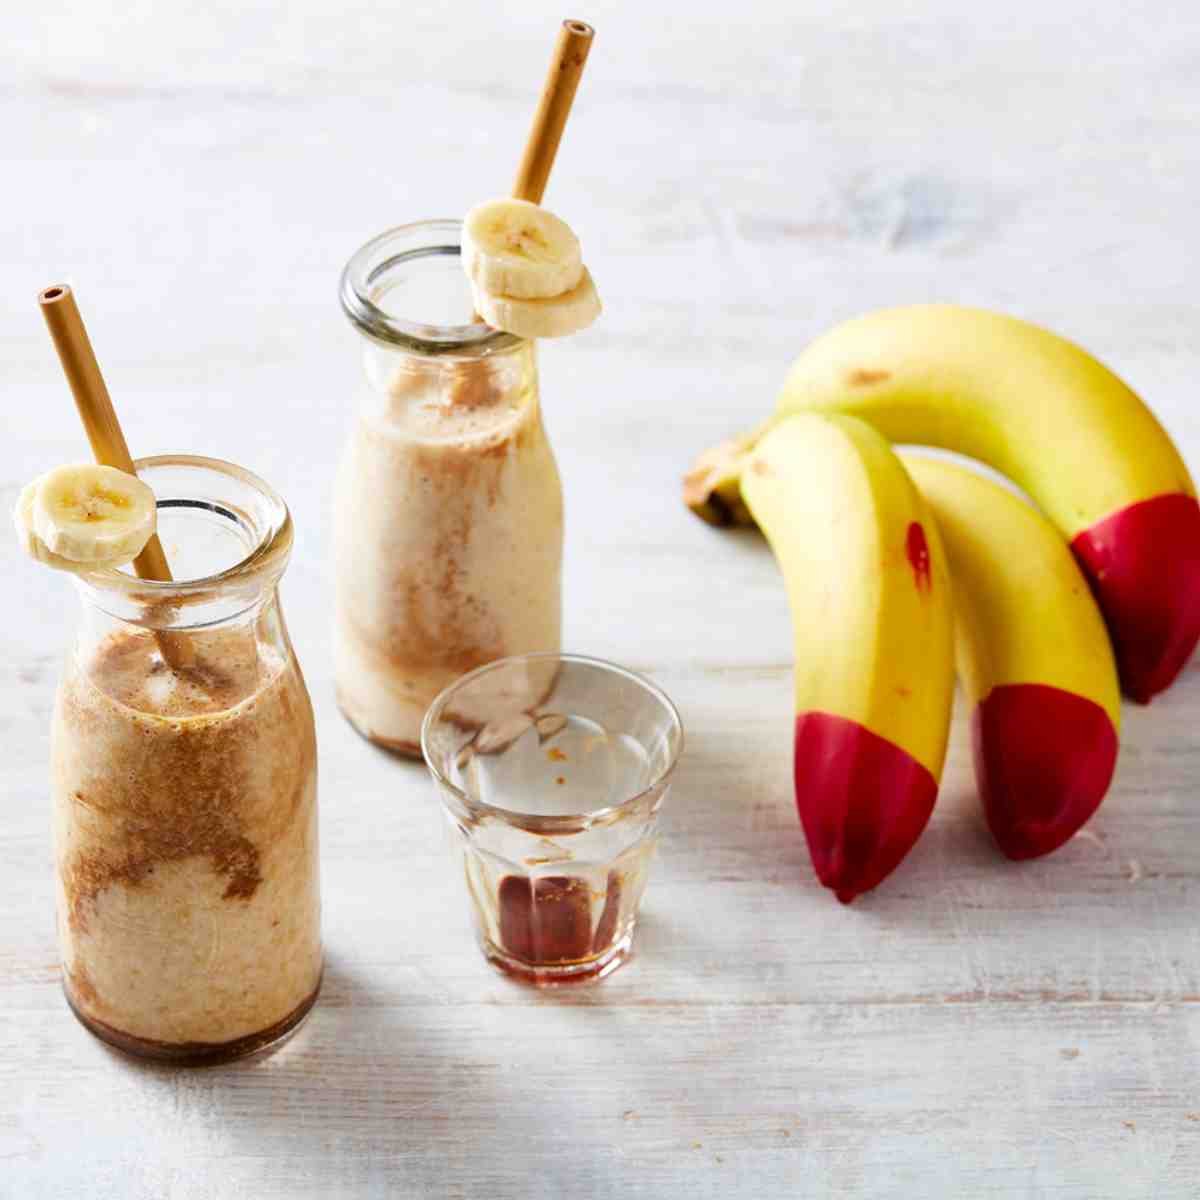 Espresso Banana Breakfast Shake in milk bottles, with bananas placed next to the bottles.